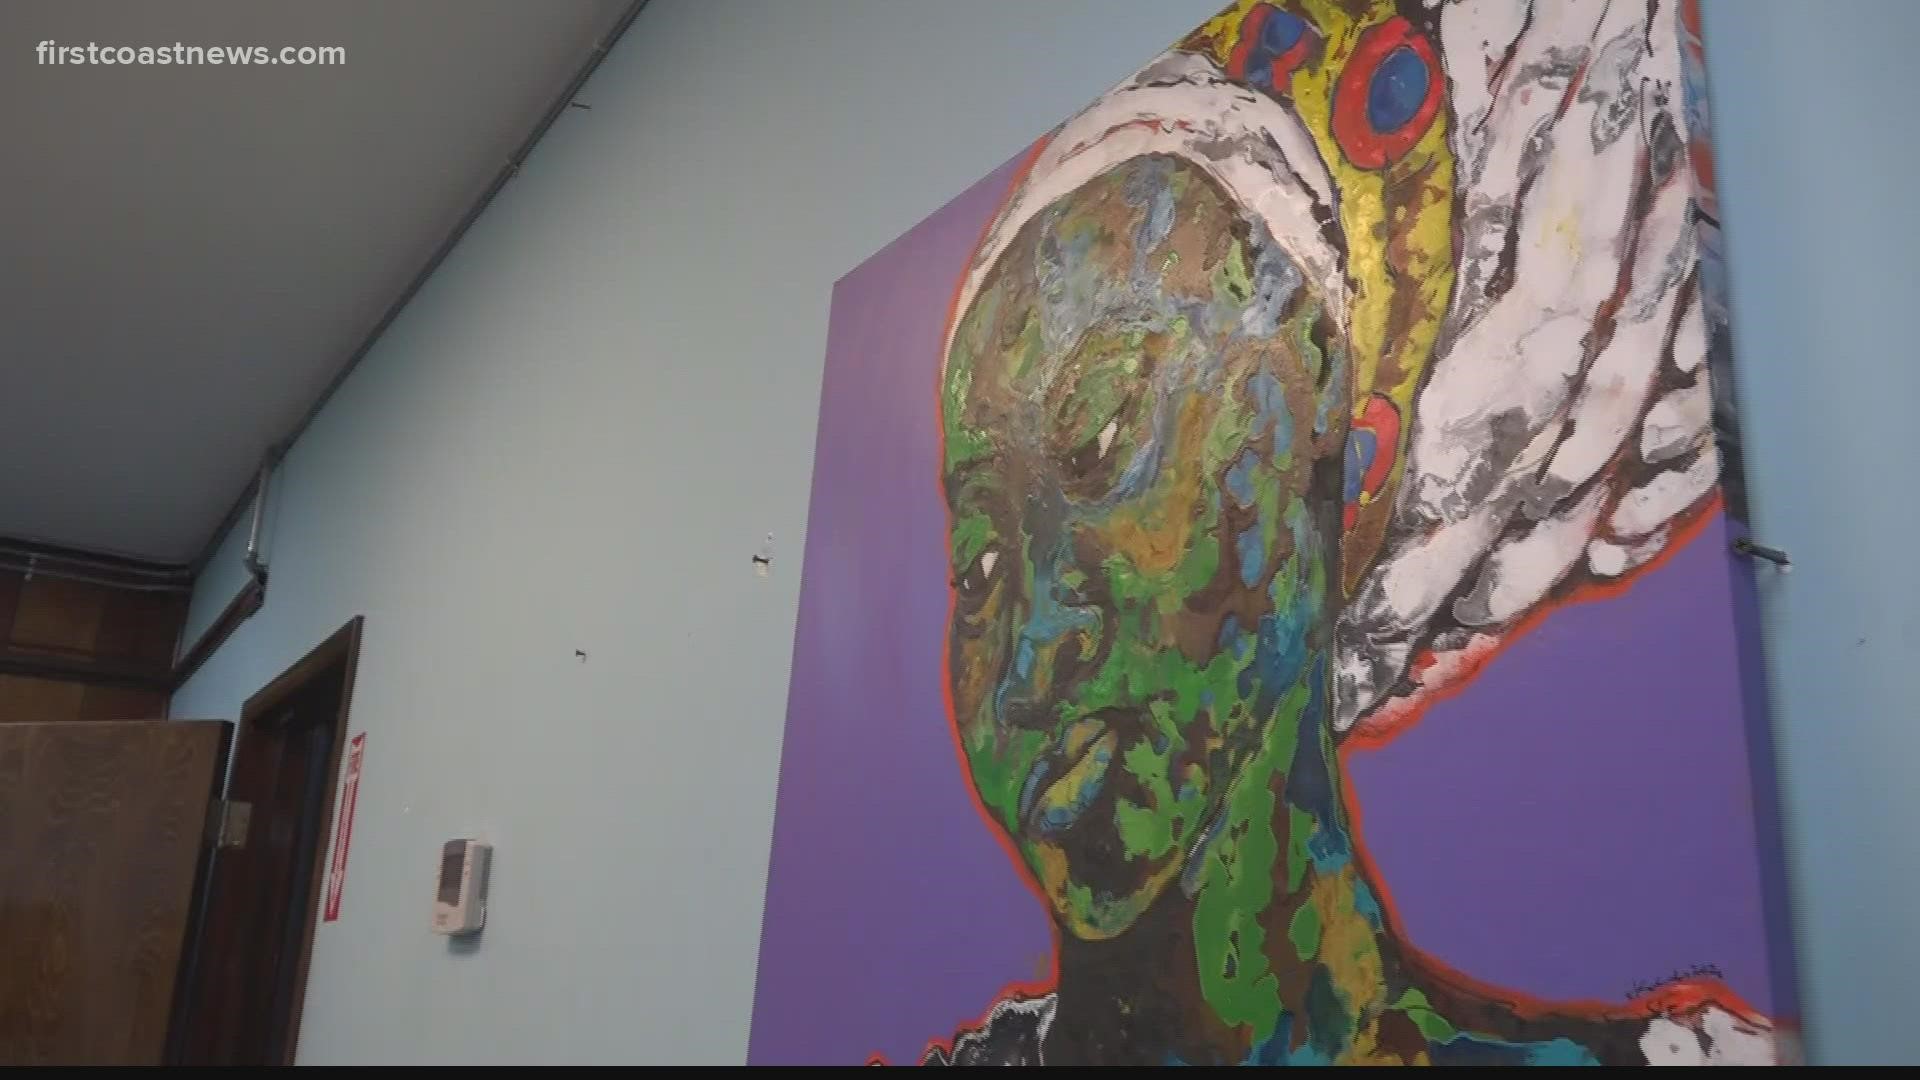 The center is ready to bring lessons in art, Black history and more to the Eastside.